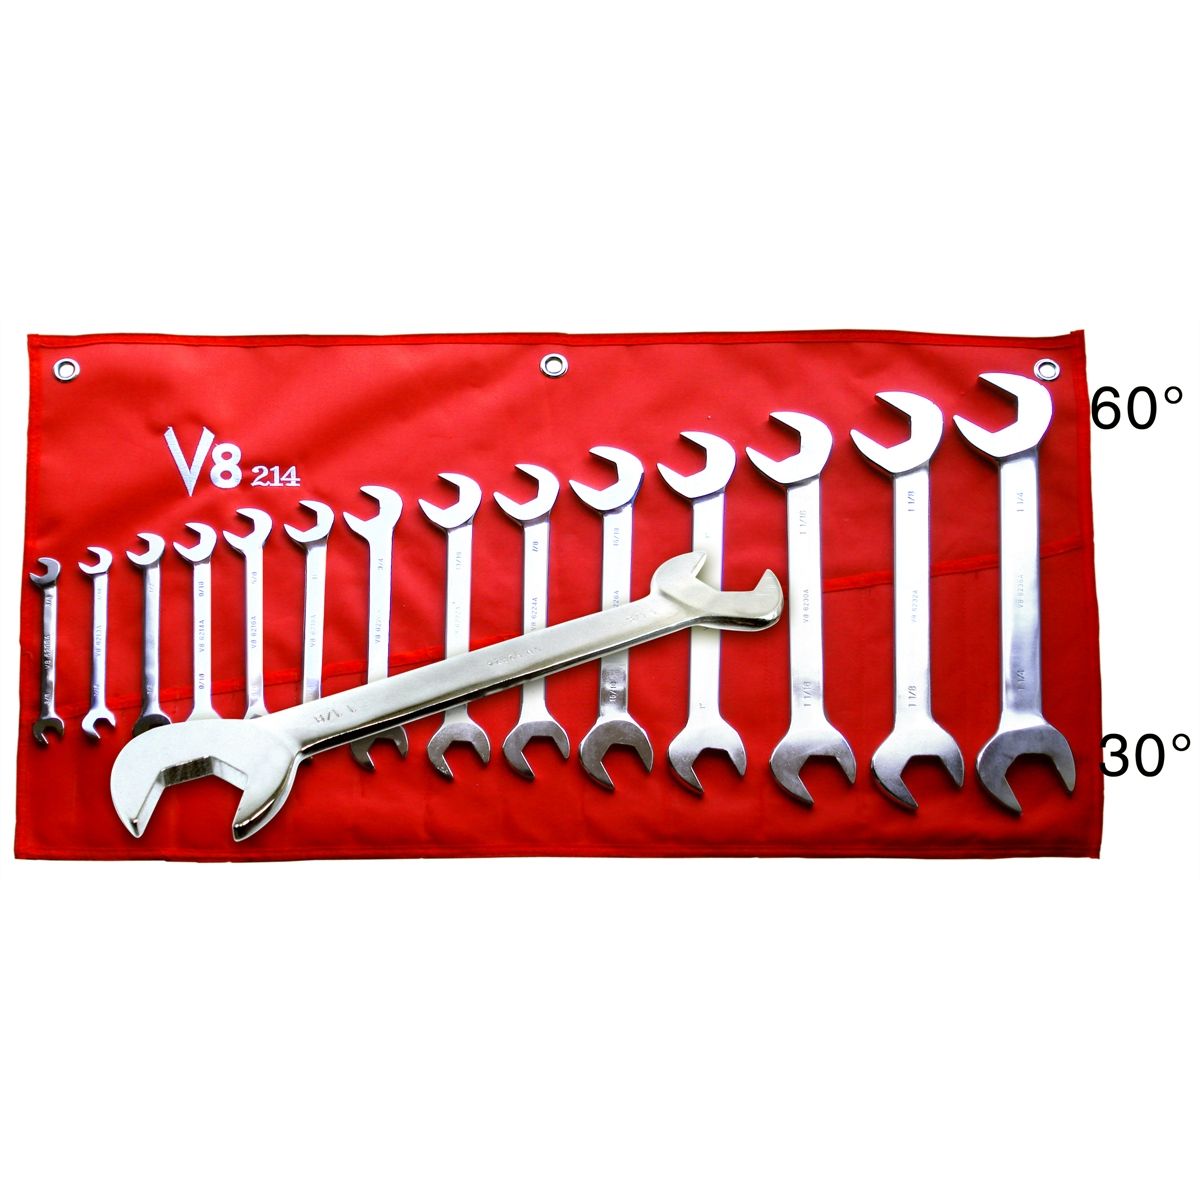 Angle Head Wrench Set Fractional SAE 3/8 to 1-1/4 Inch 14 Pc